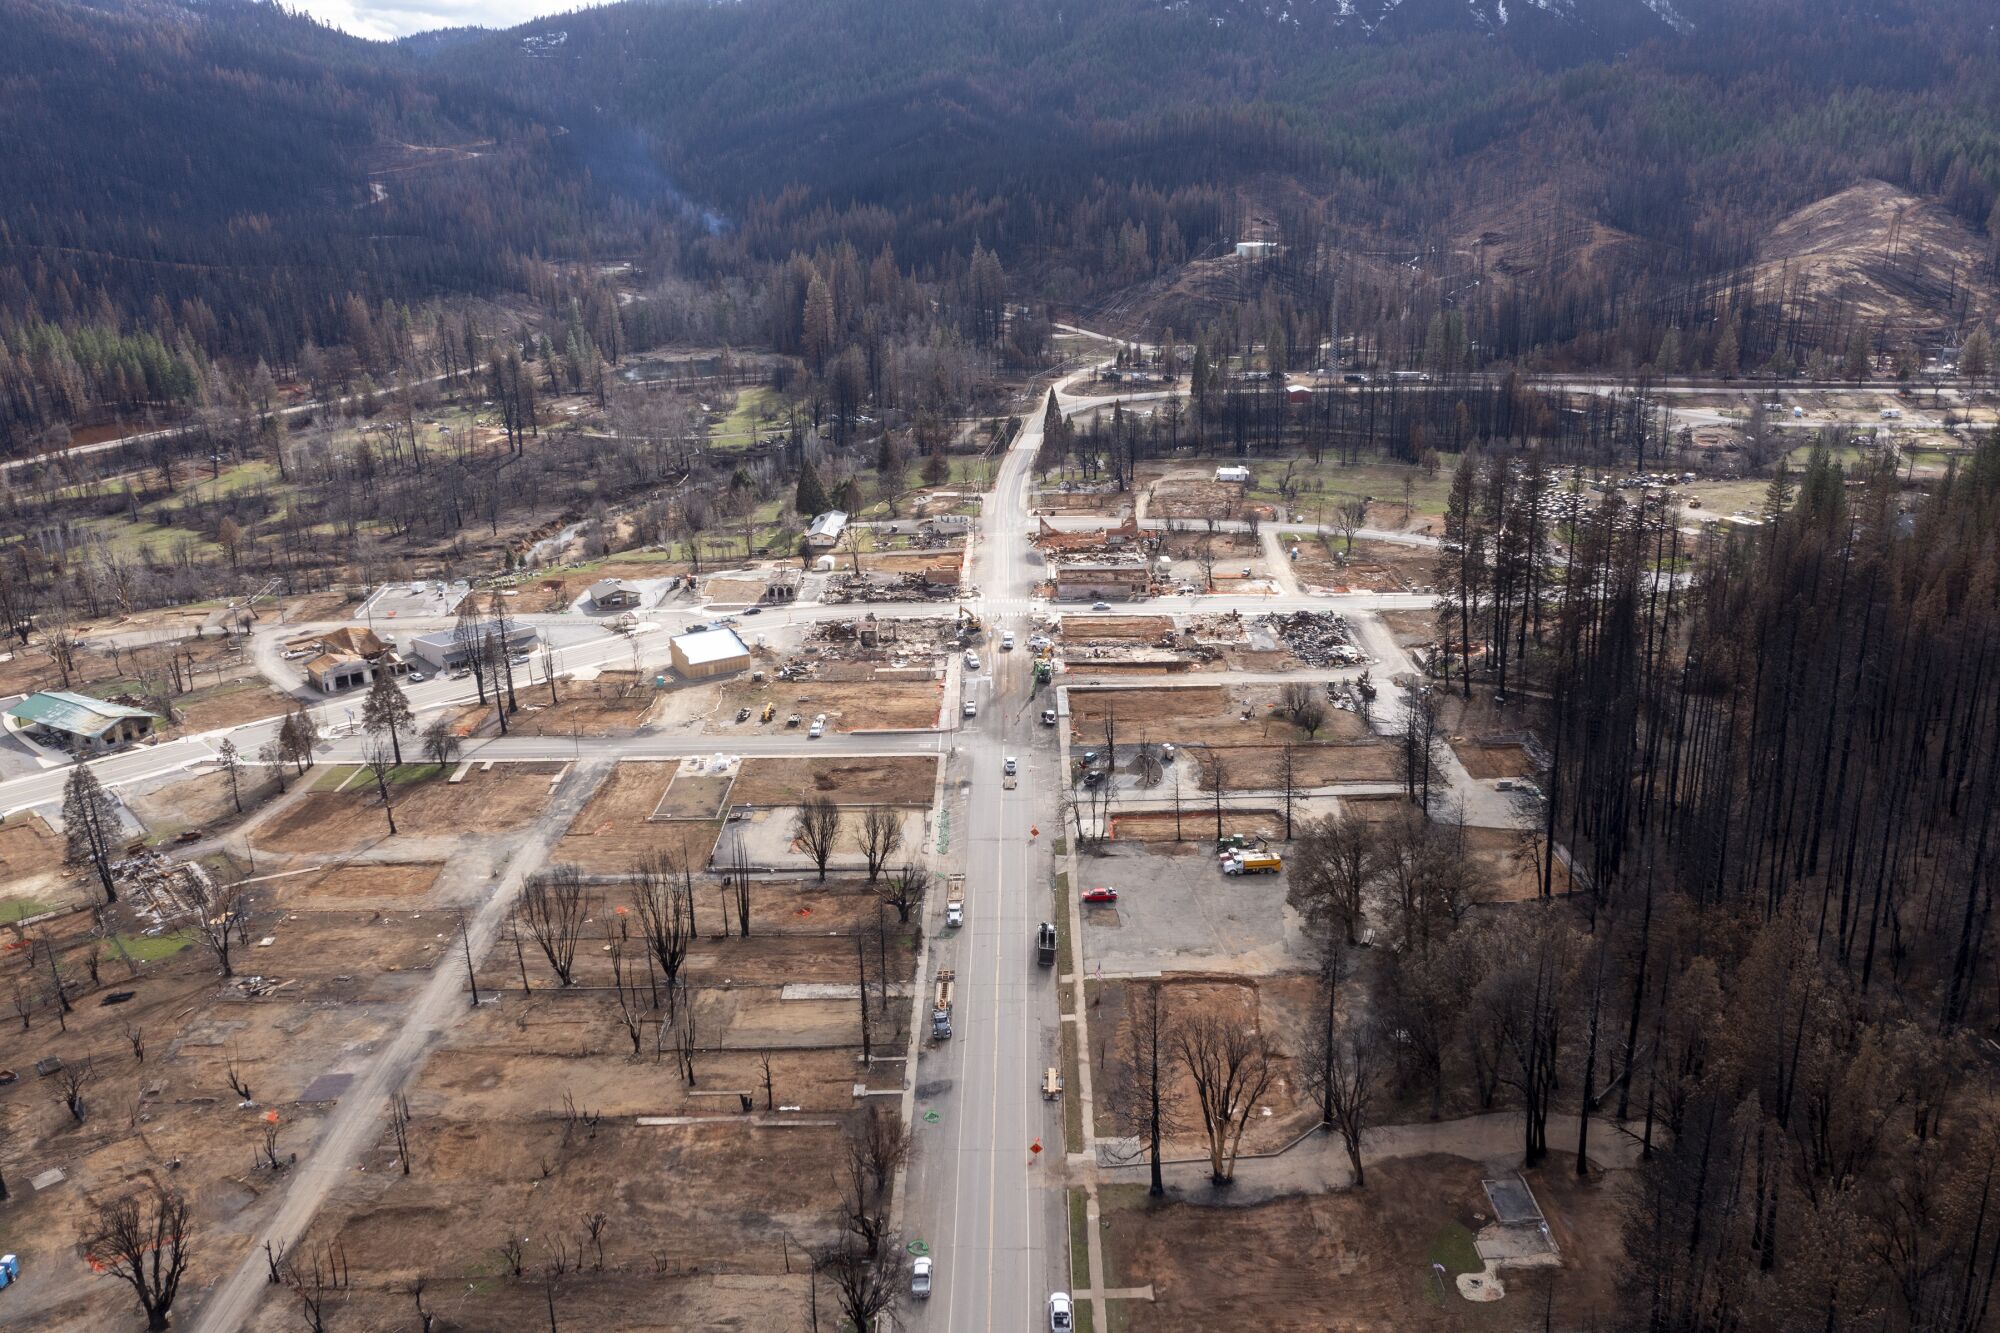 Scorched trees and empty lots in the streets of Greenville, Calif.